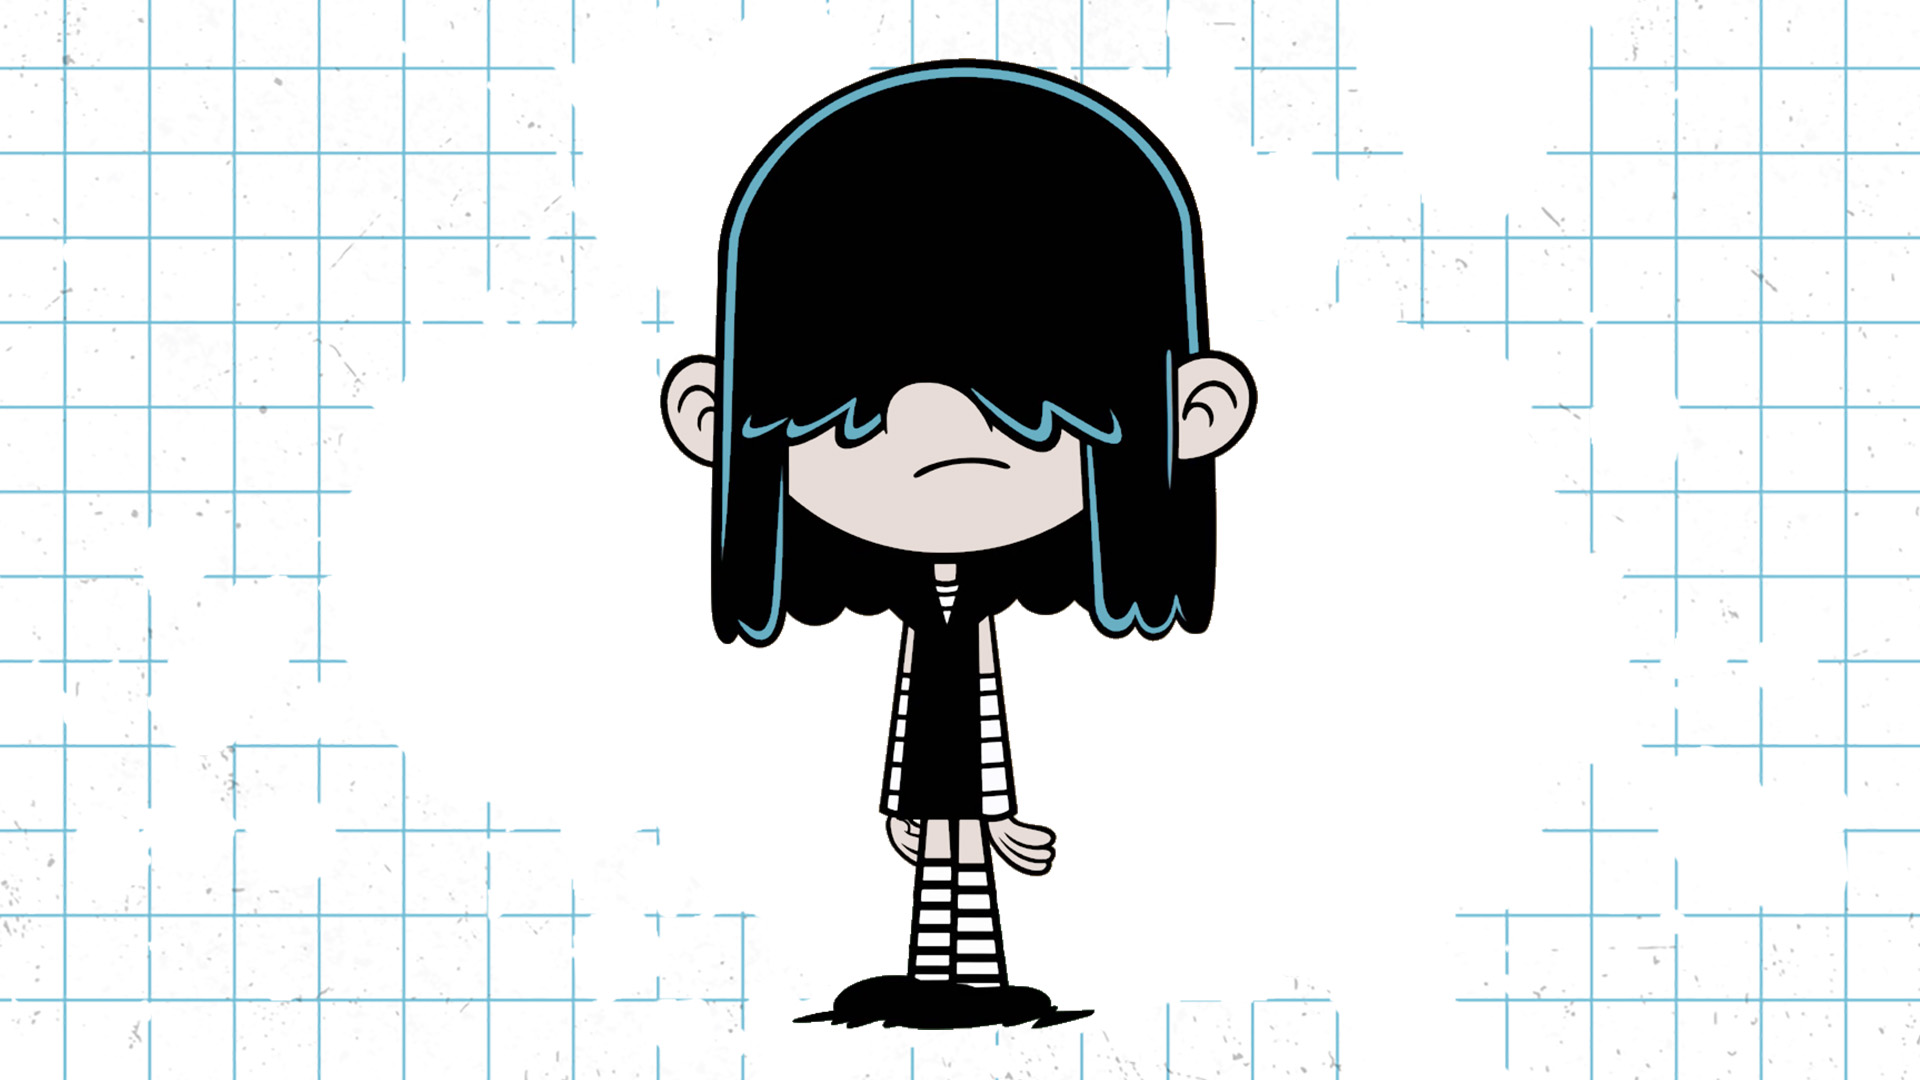 A Loud House character with black hair